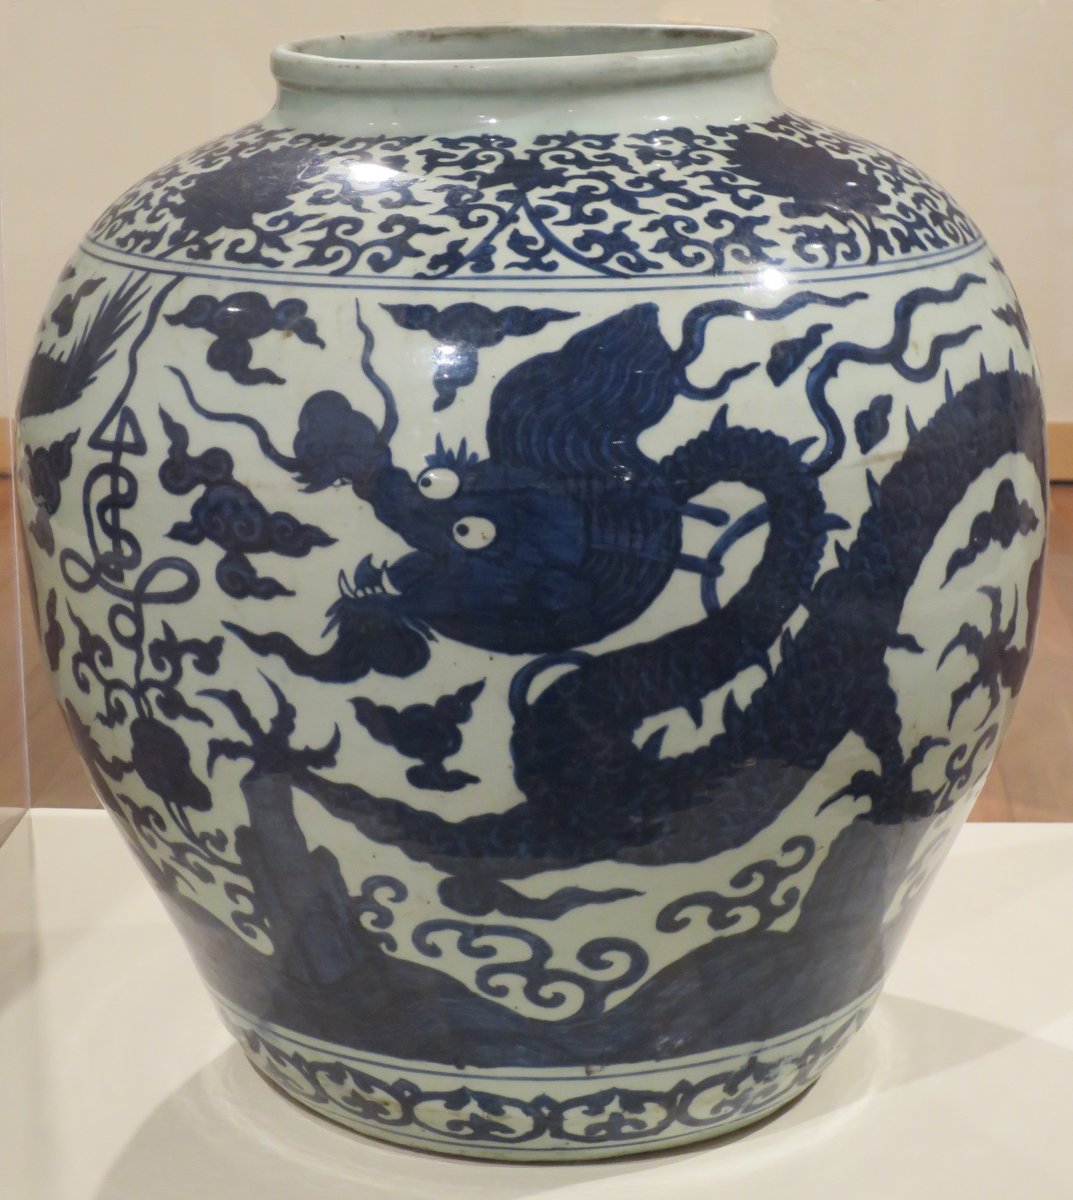 Jar from the Ming dynasty.